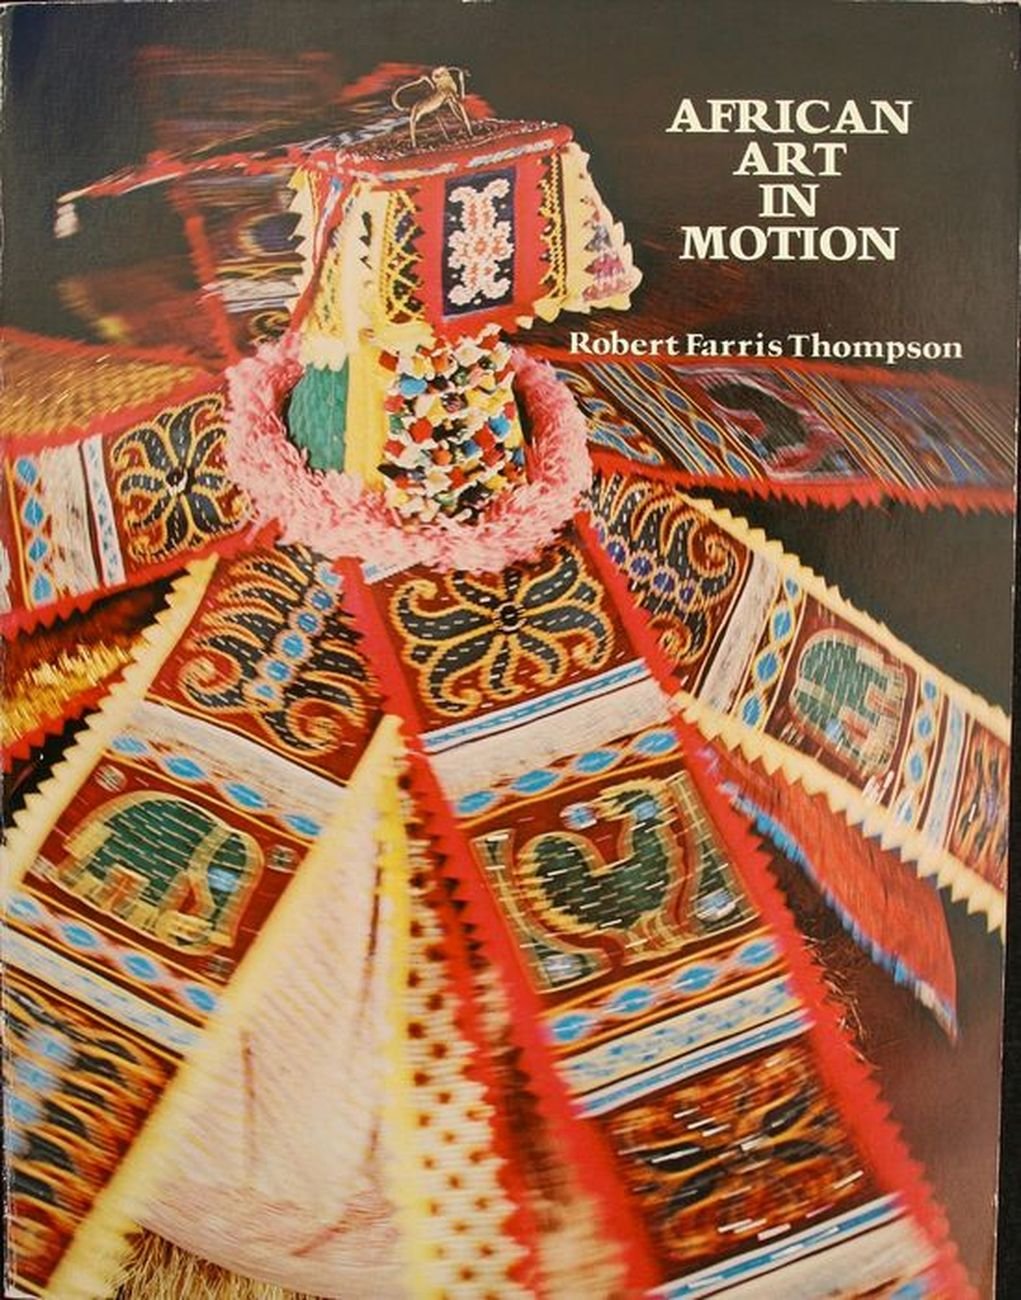 Il catalogo di "African Art in Motion" (National Gallery of Art, Washington, 1974)